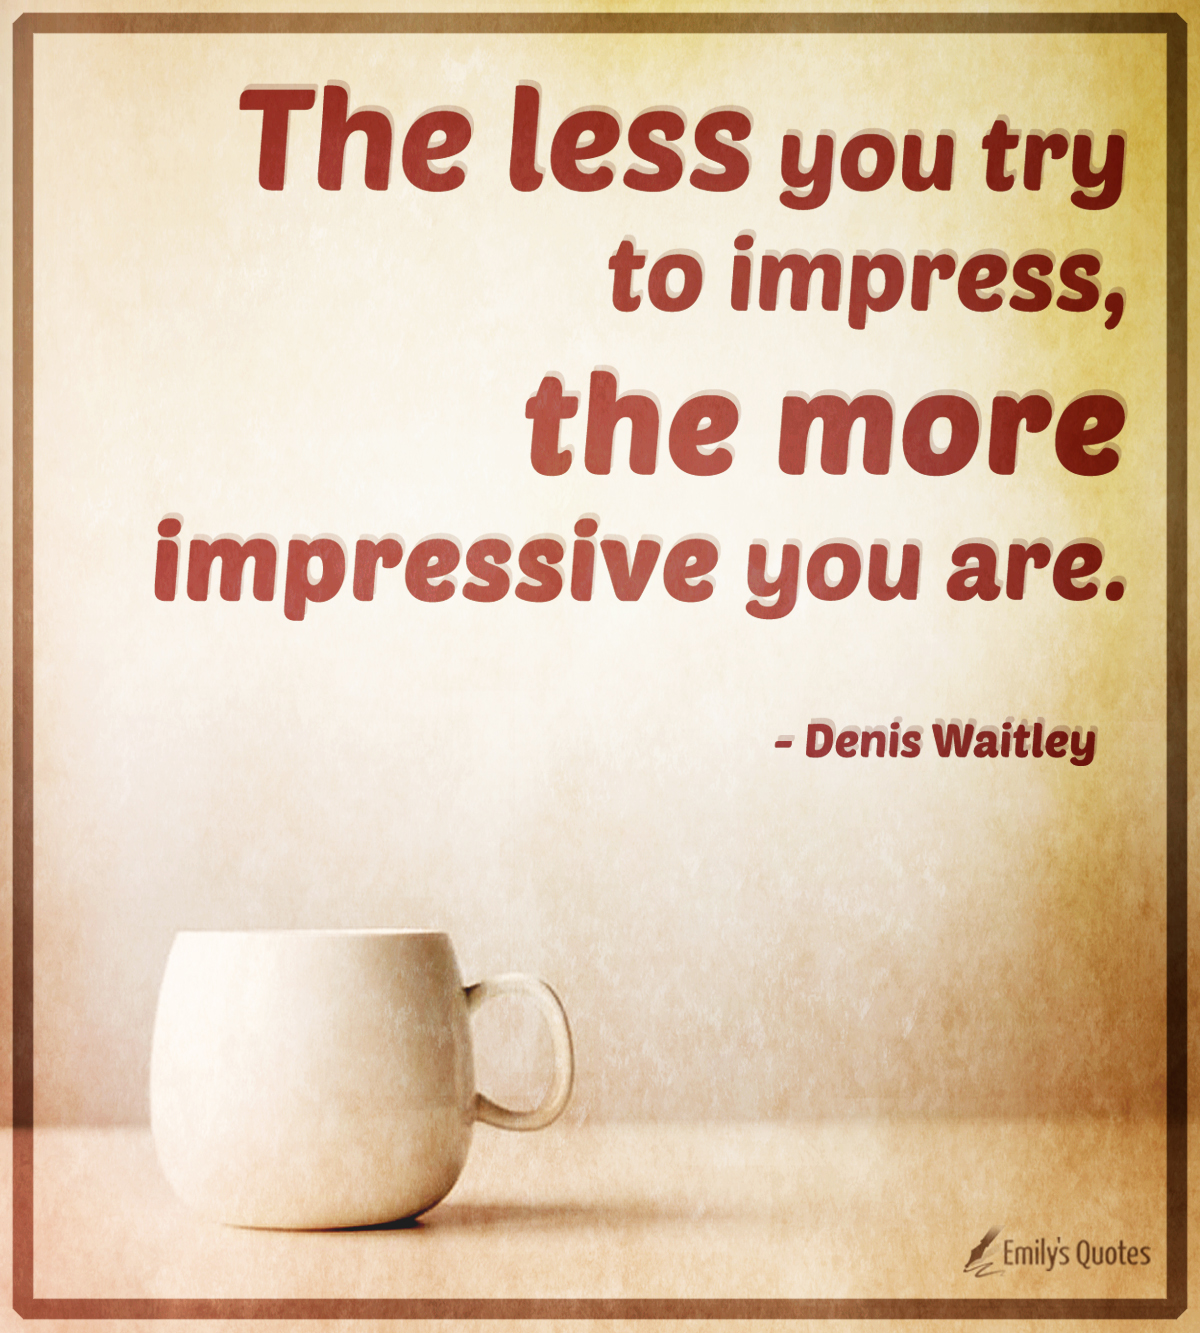 The less you try to impress, the more impressive you are